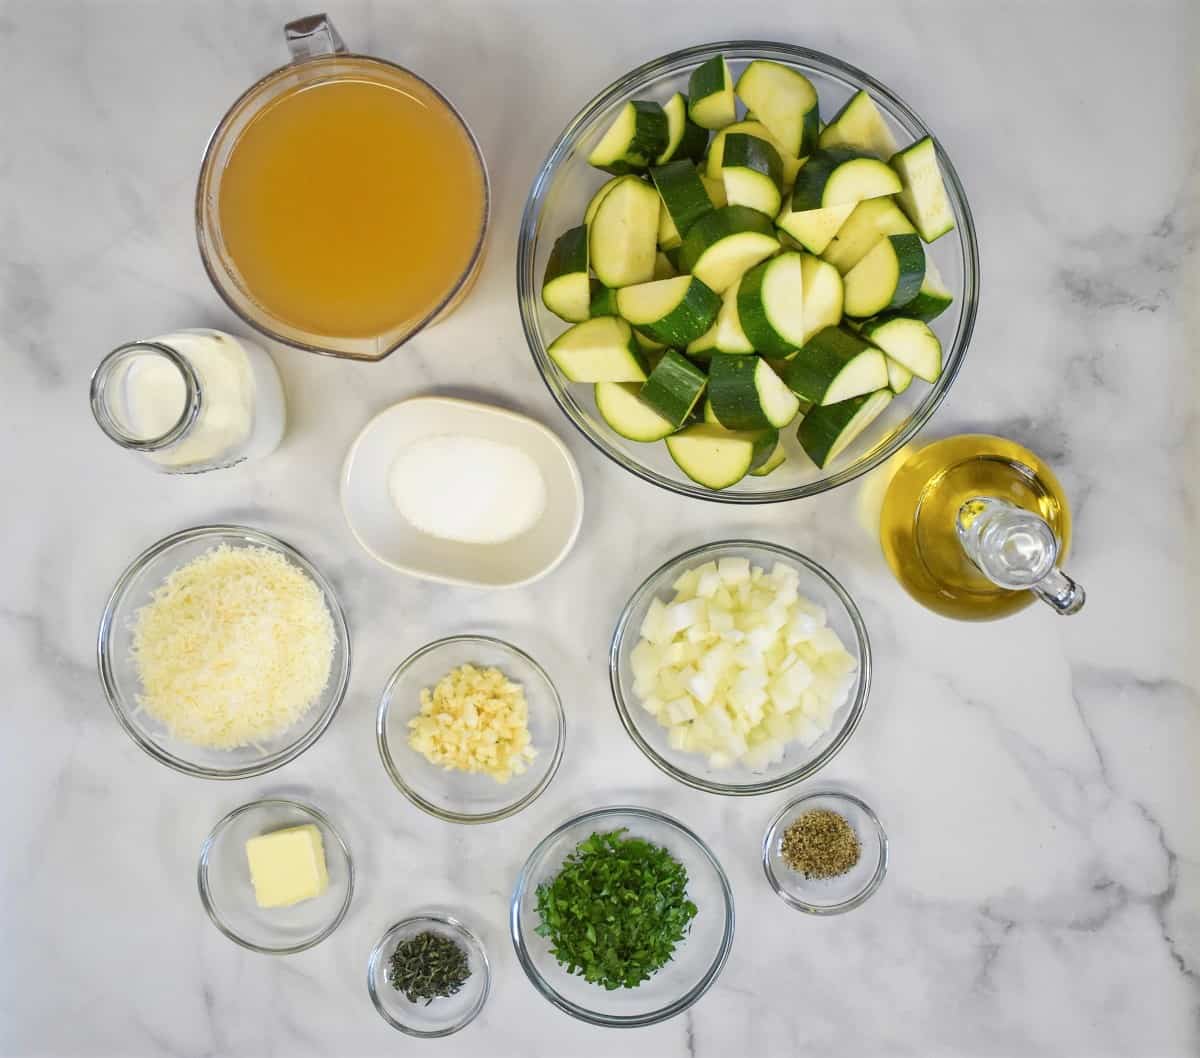 The ingredients for the soup prepped and separated into clear bowls, displayed on a white table.